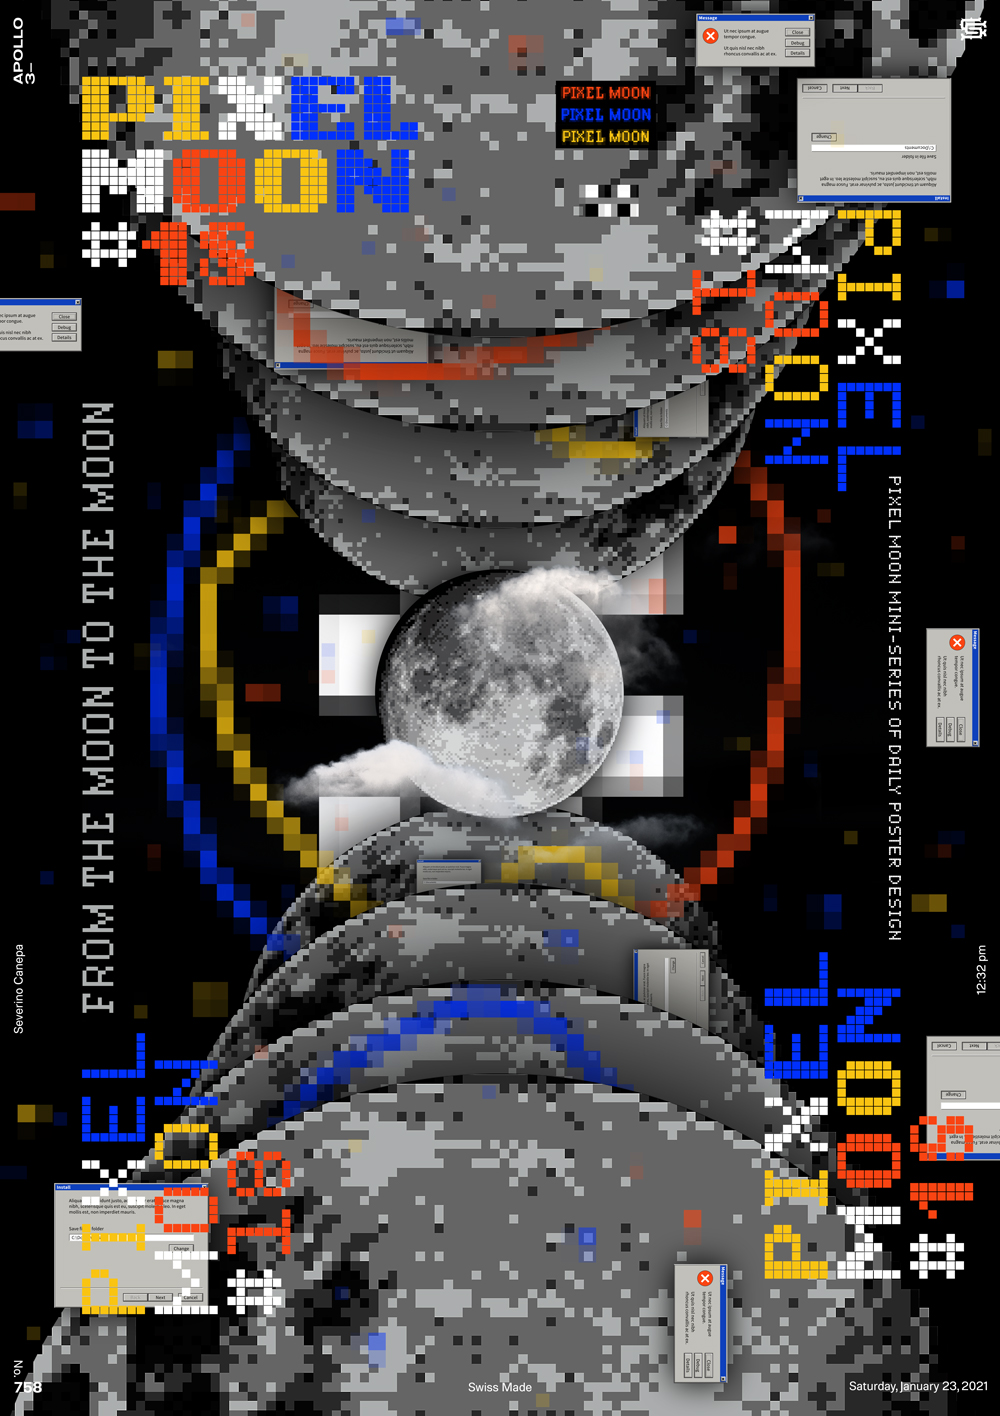 Visual graphic based on the repetition of a pixel moon and other elements